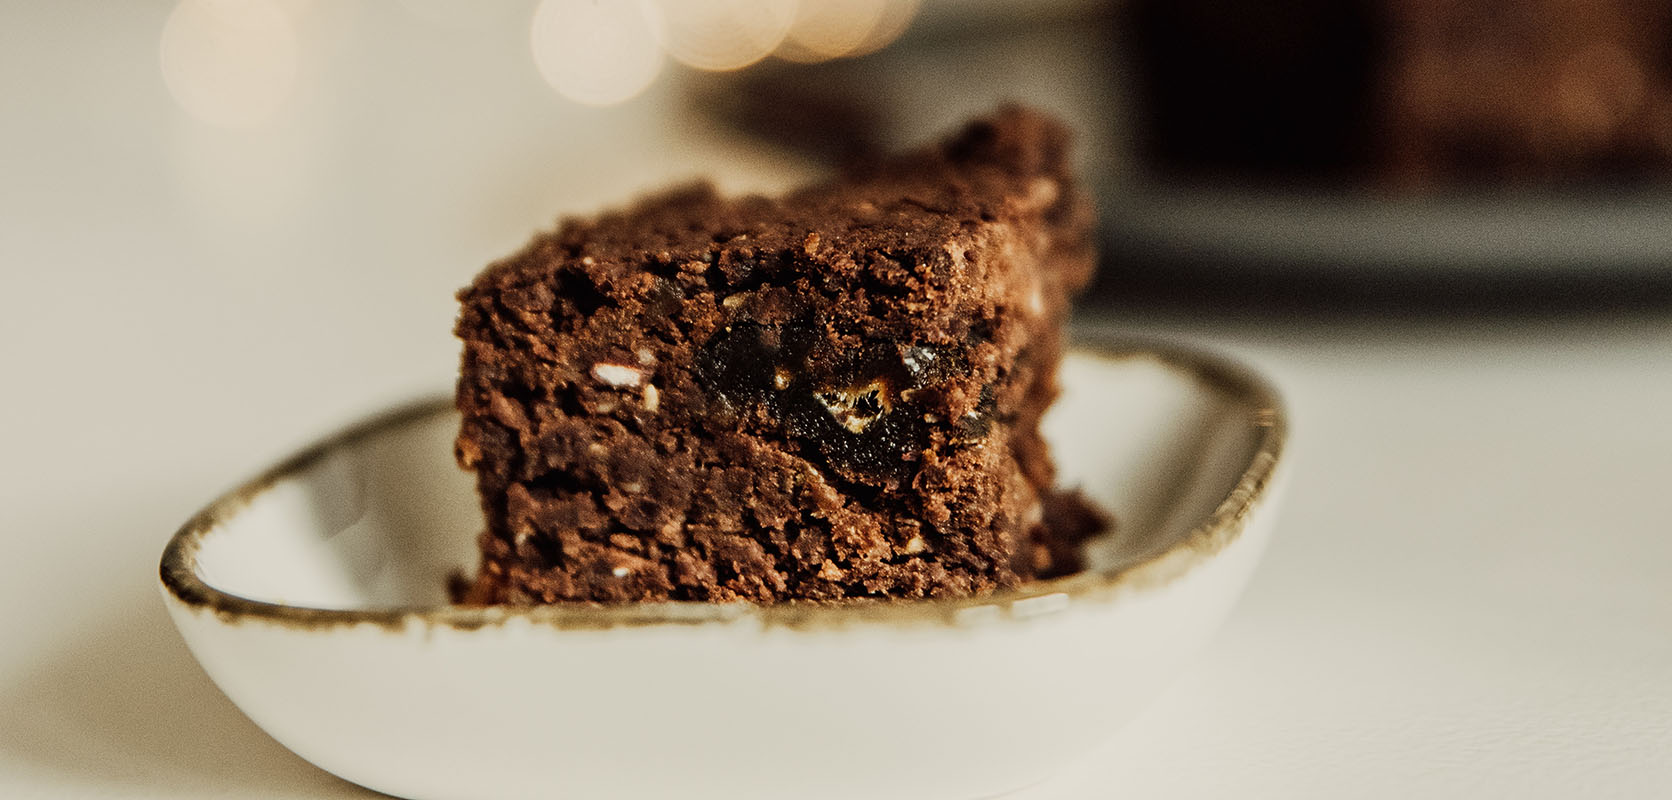 Delicious weed brownies and THC edibles from Low Price Bud online weed dispensary for baked edibles and weed chocolate.